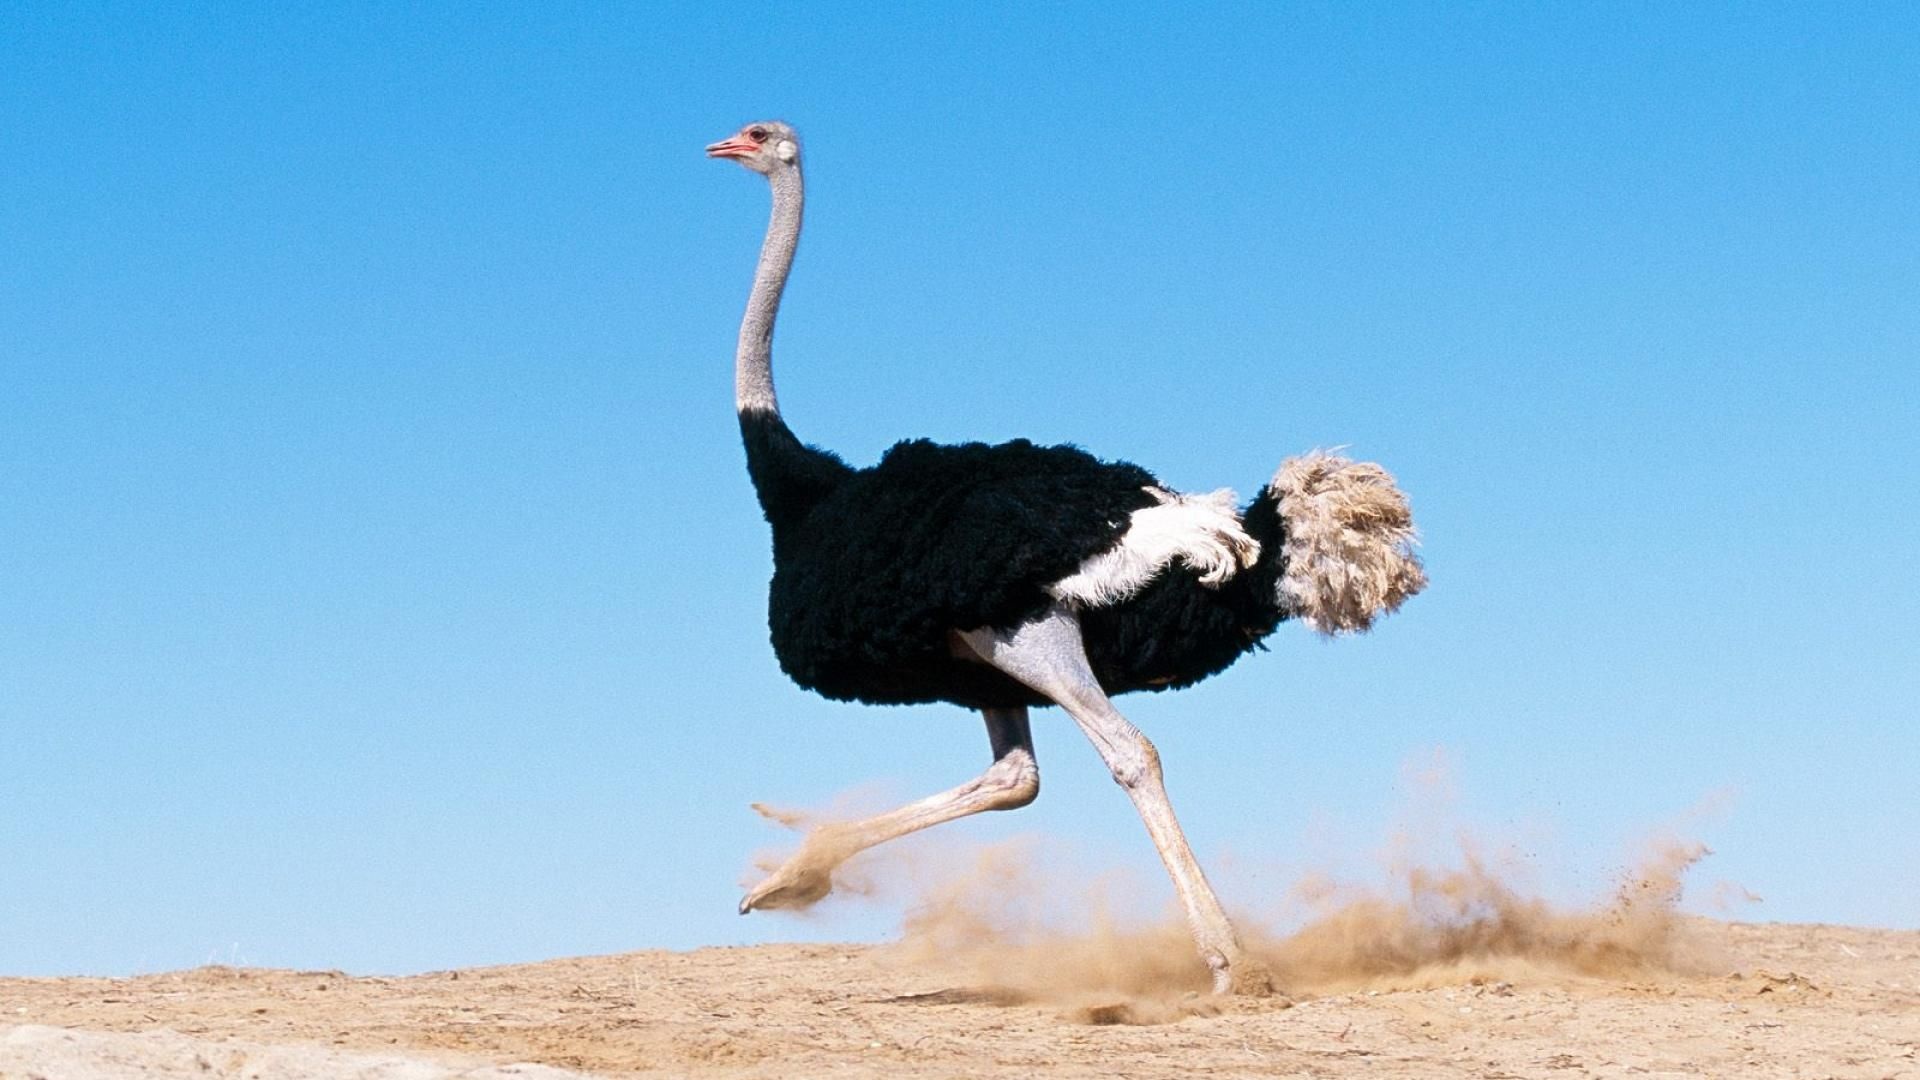 Vibrant ostrich wallpapers, High-quality images, Dynamic backgrounds, Visual appeal, 1920x1080 Full HD Desktop